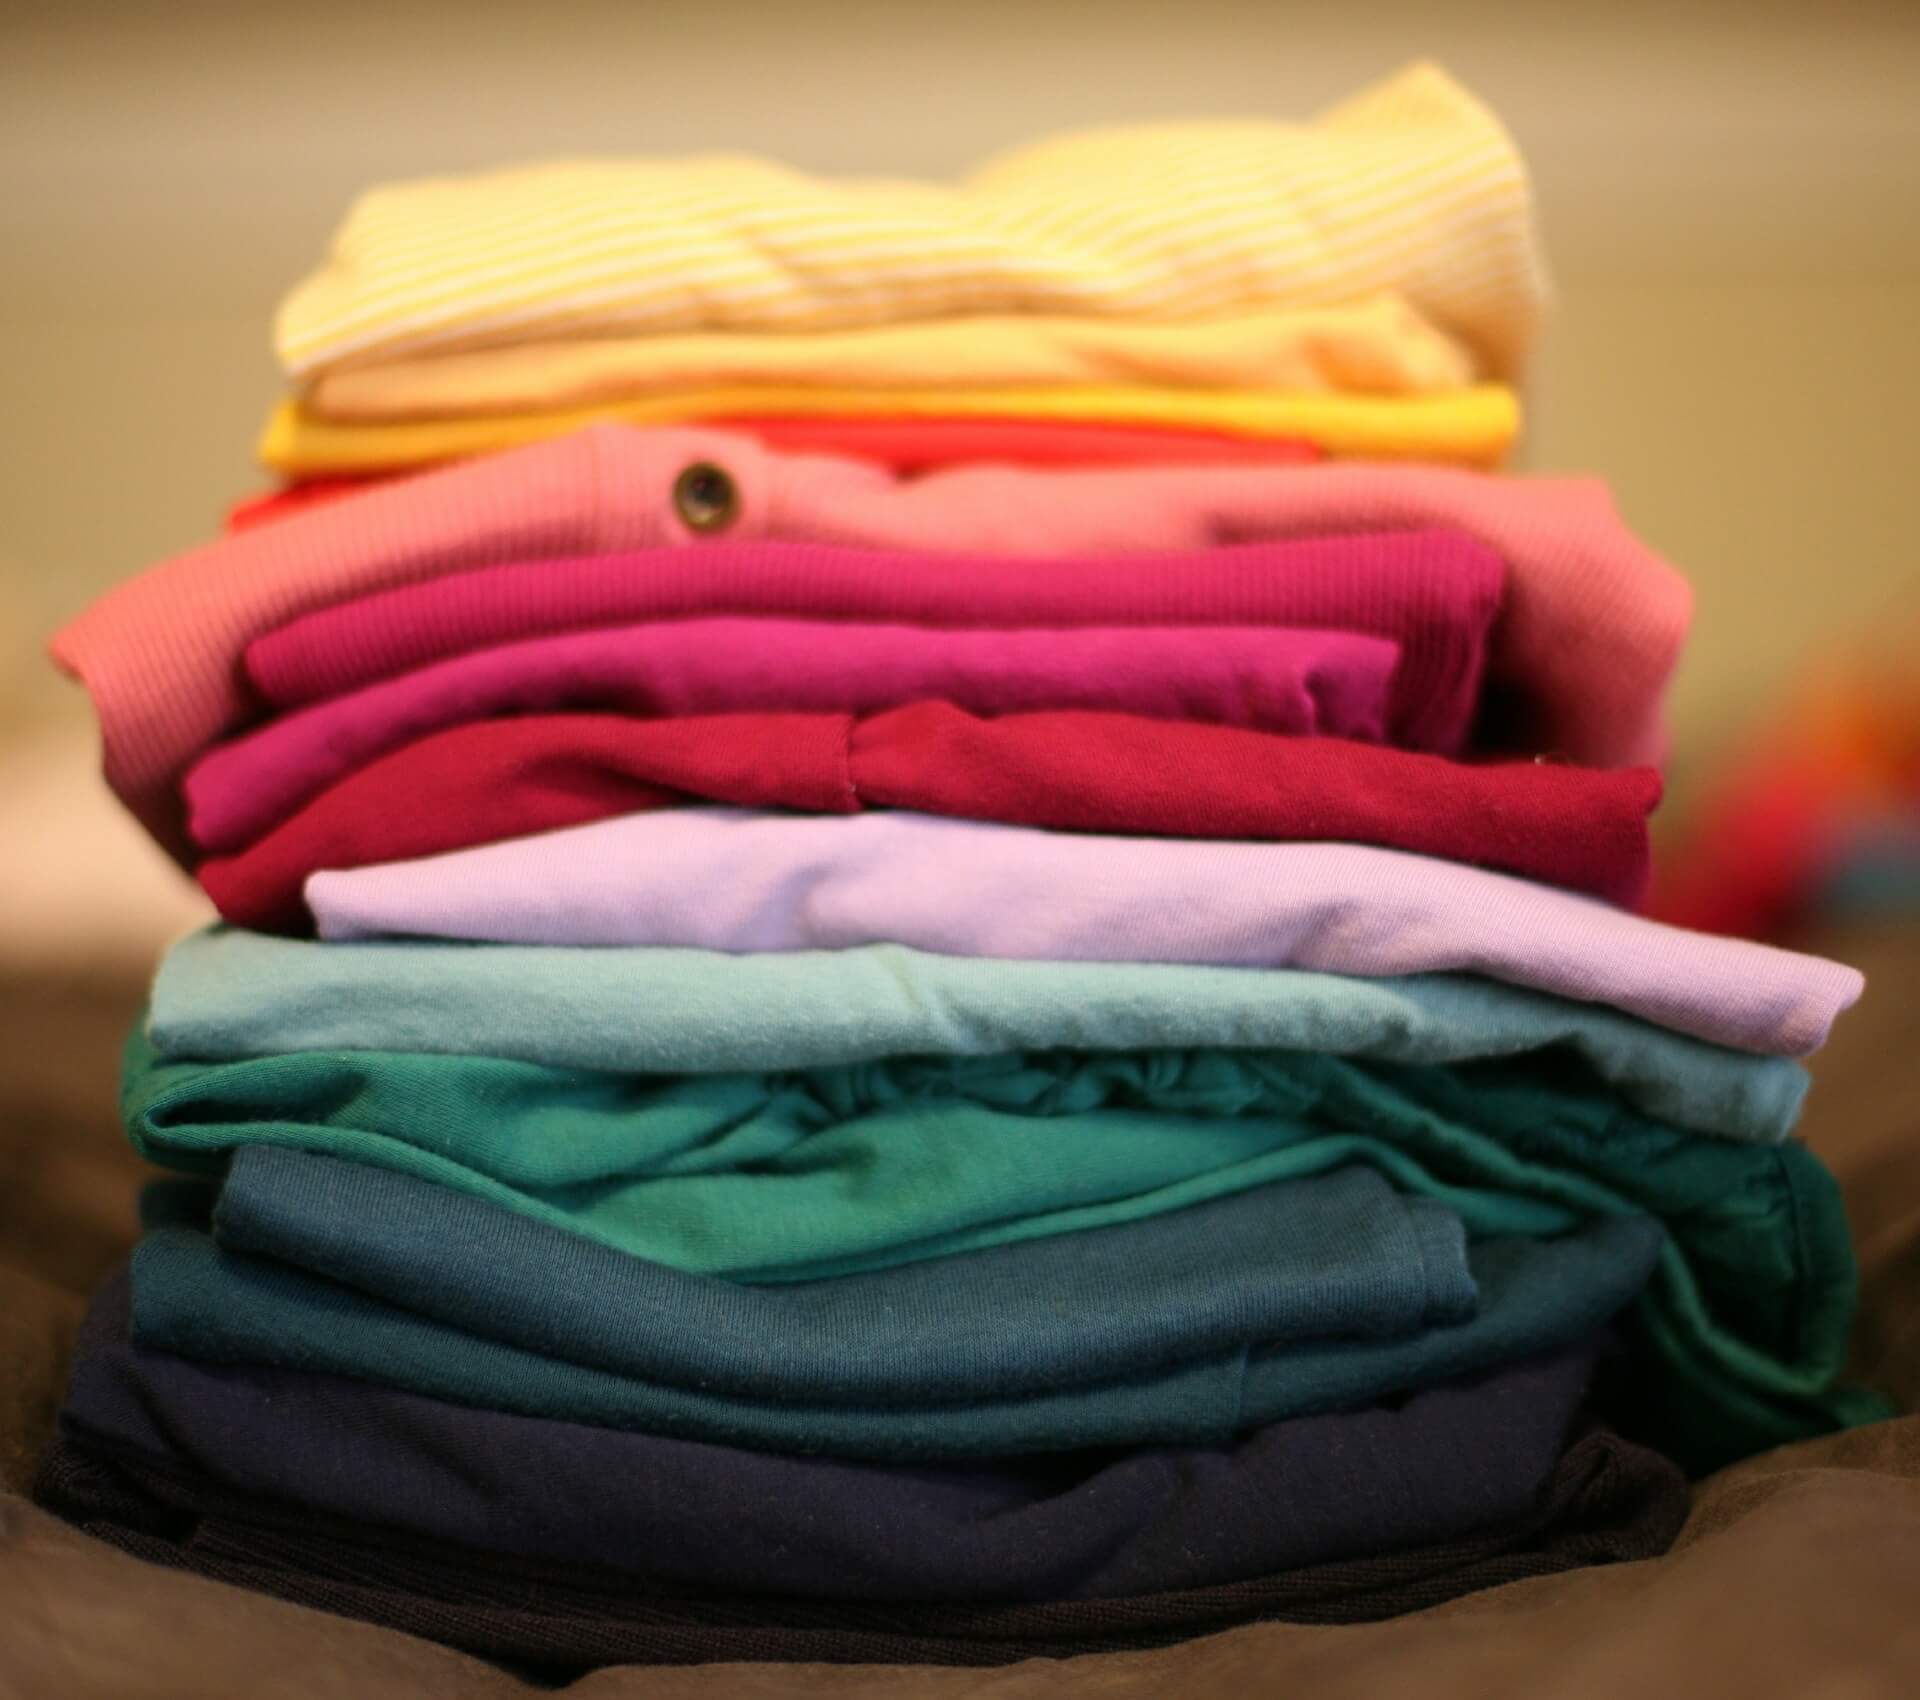 Why You Should Go For Retail Quality T Shirts Over Cheap Ones